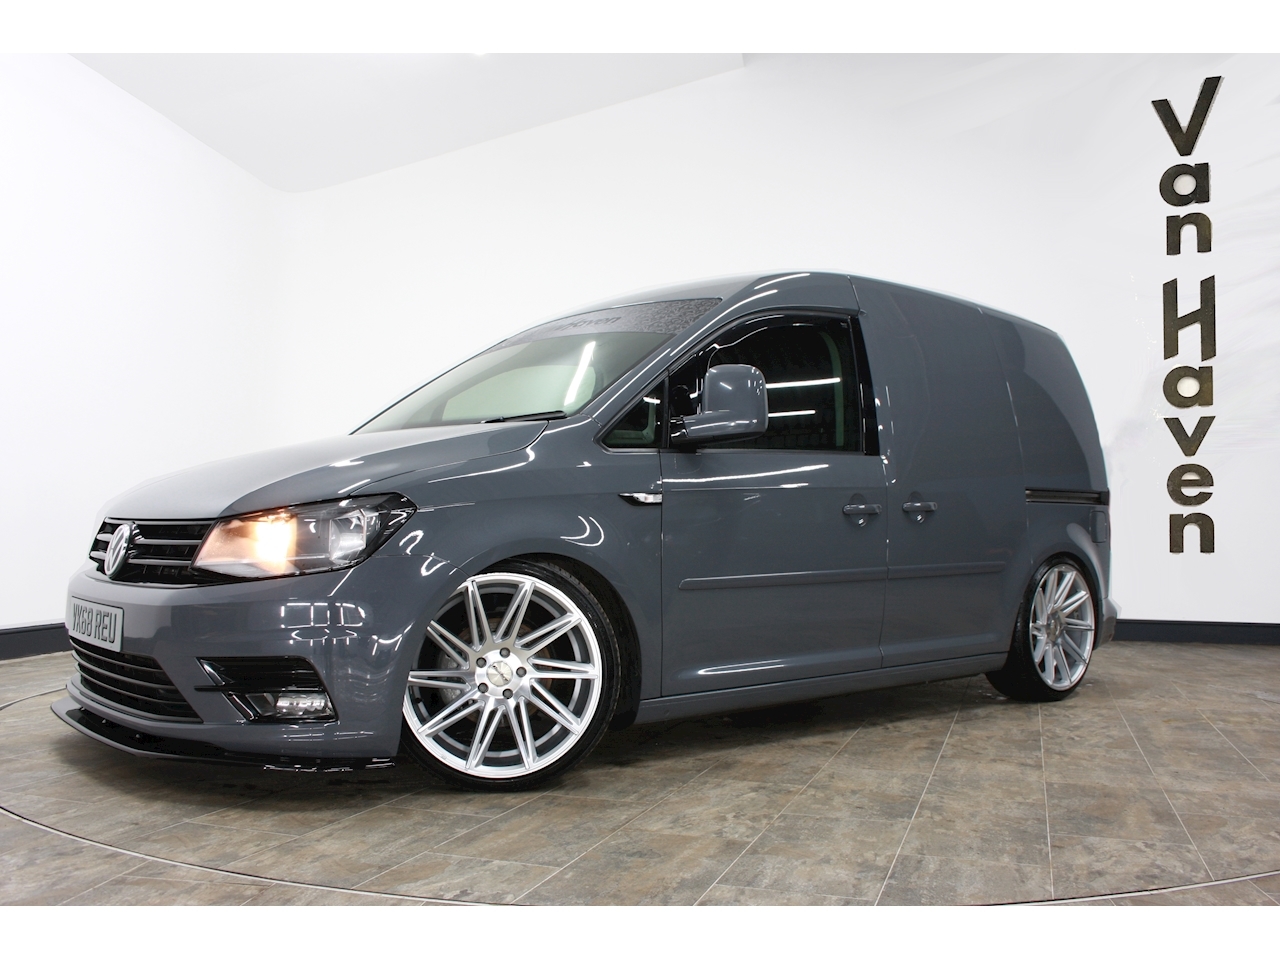 used vw caddy vans for sale